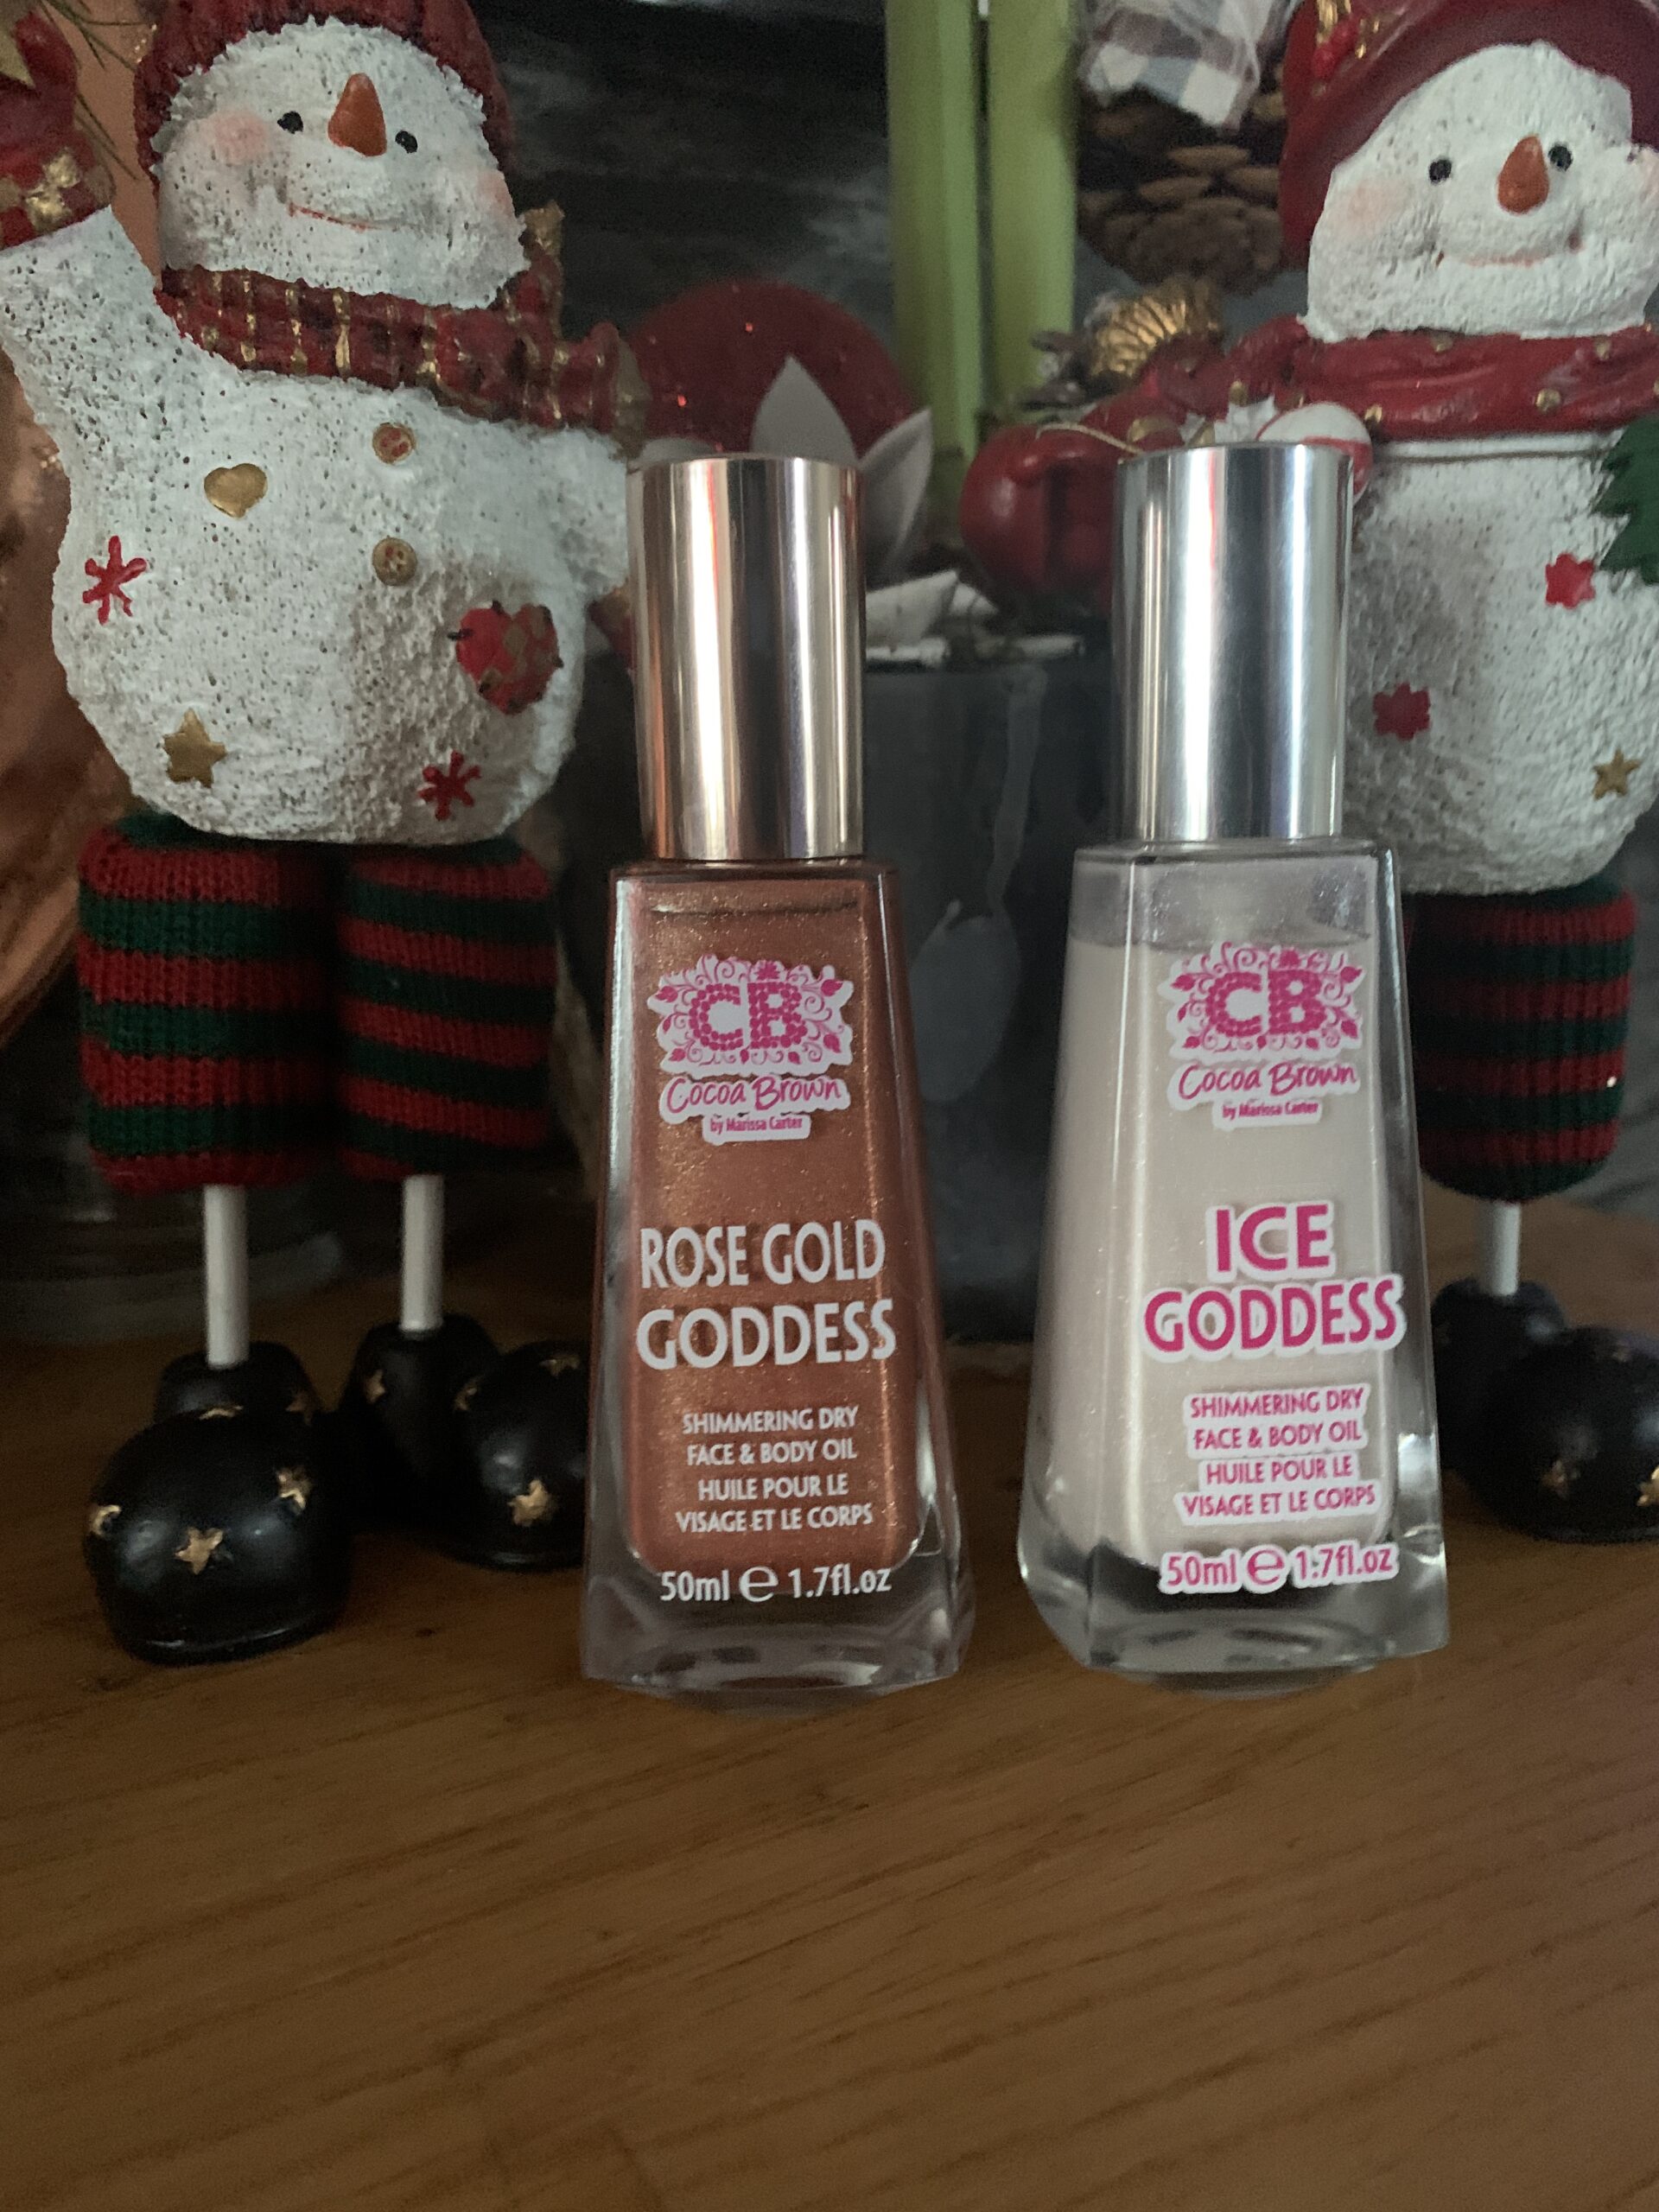 Cocoa Brown shimmering dry face & body oil